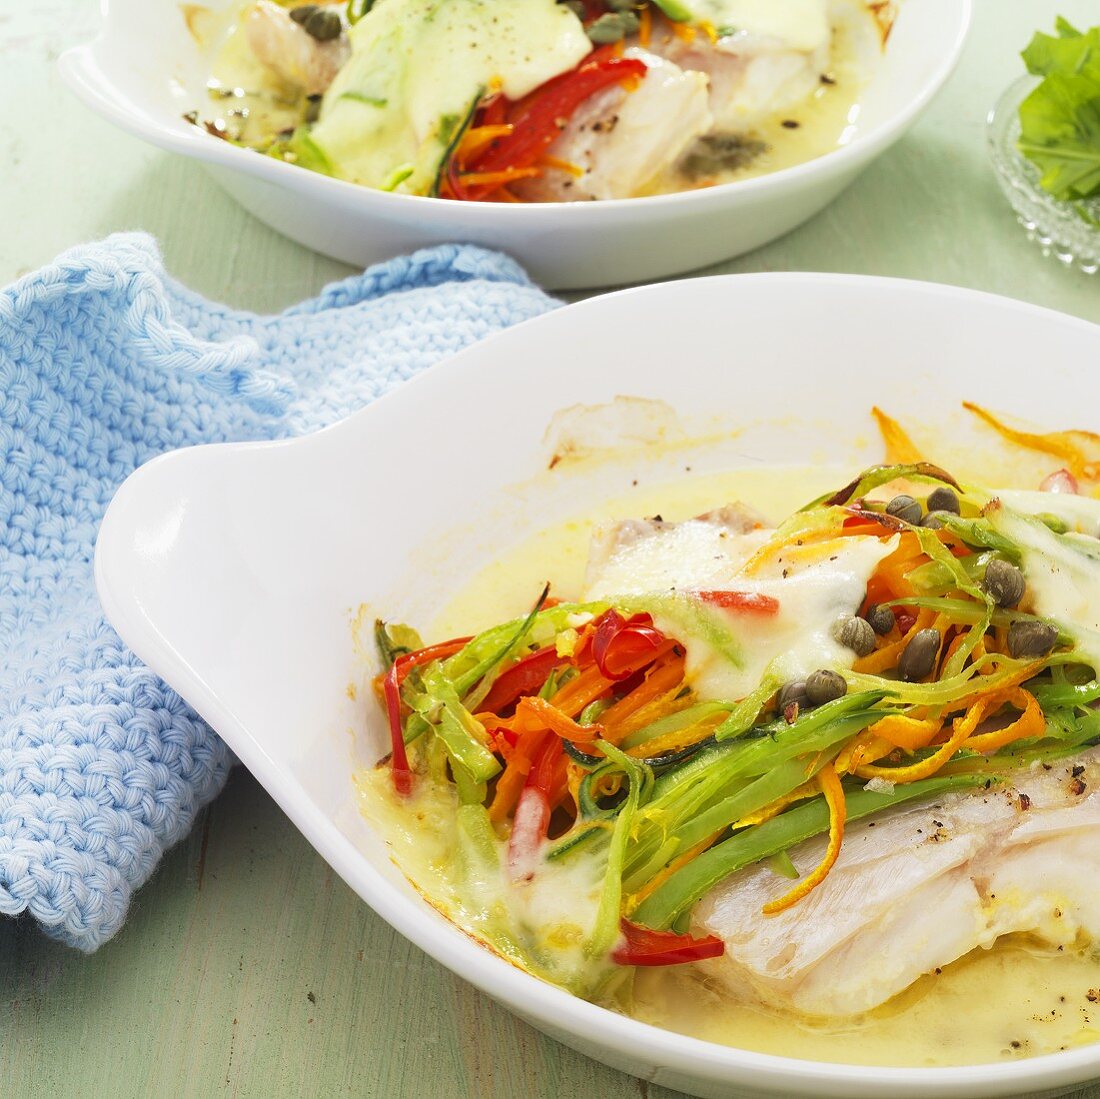 Fillet of fish with vegetables and melted mozzarella